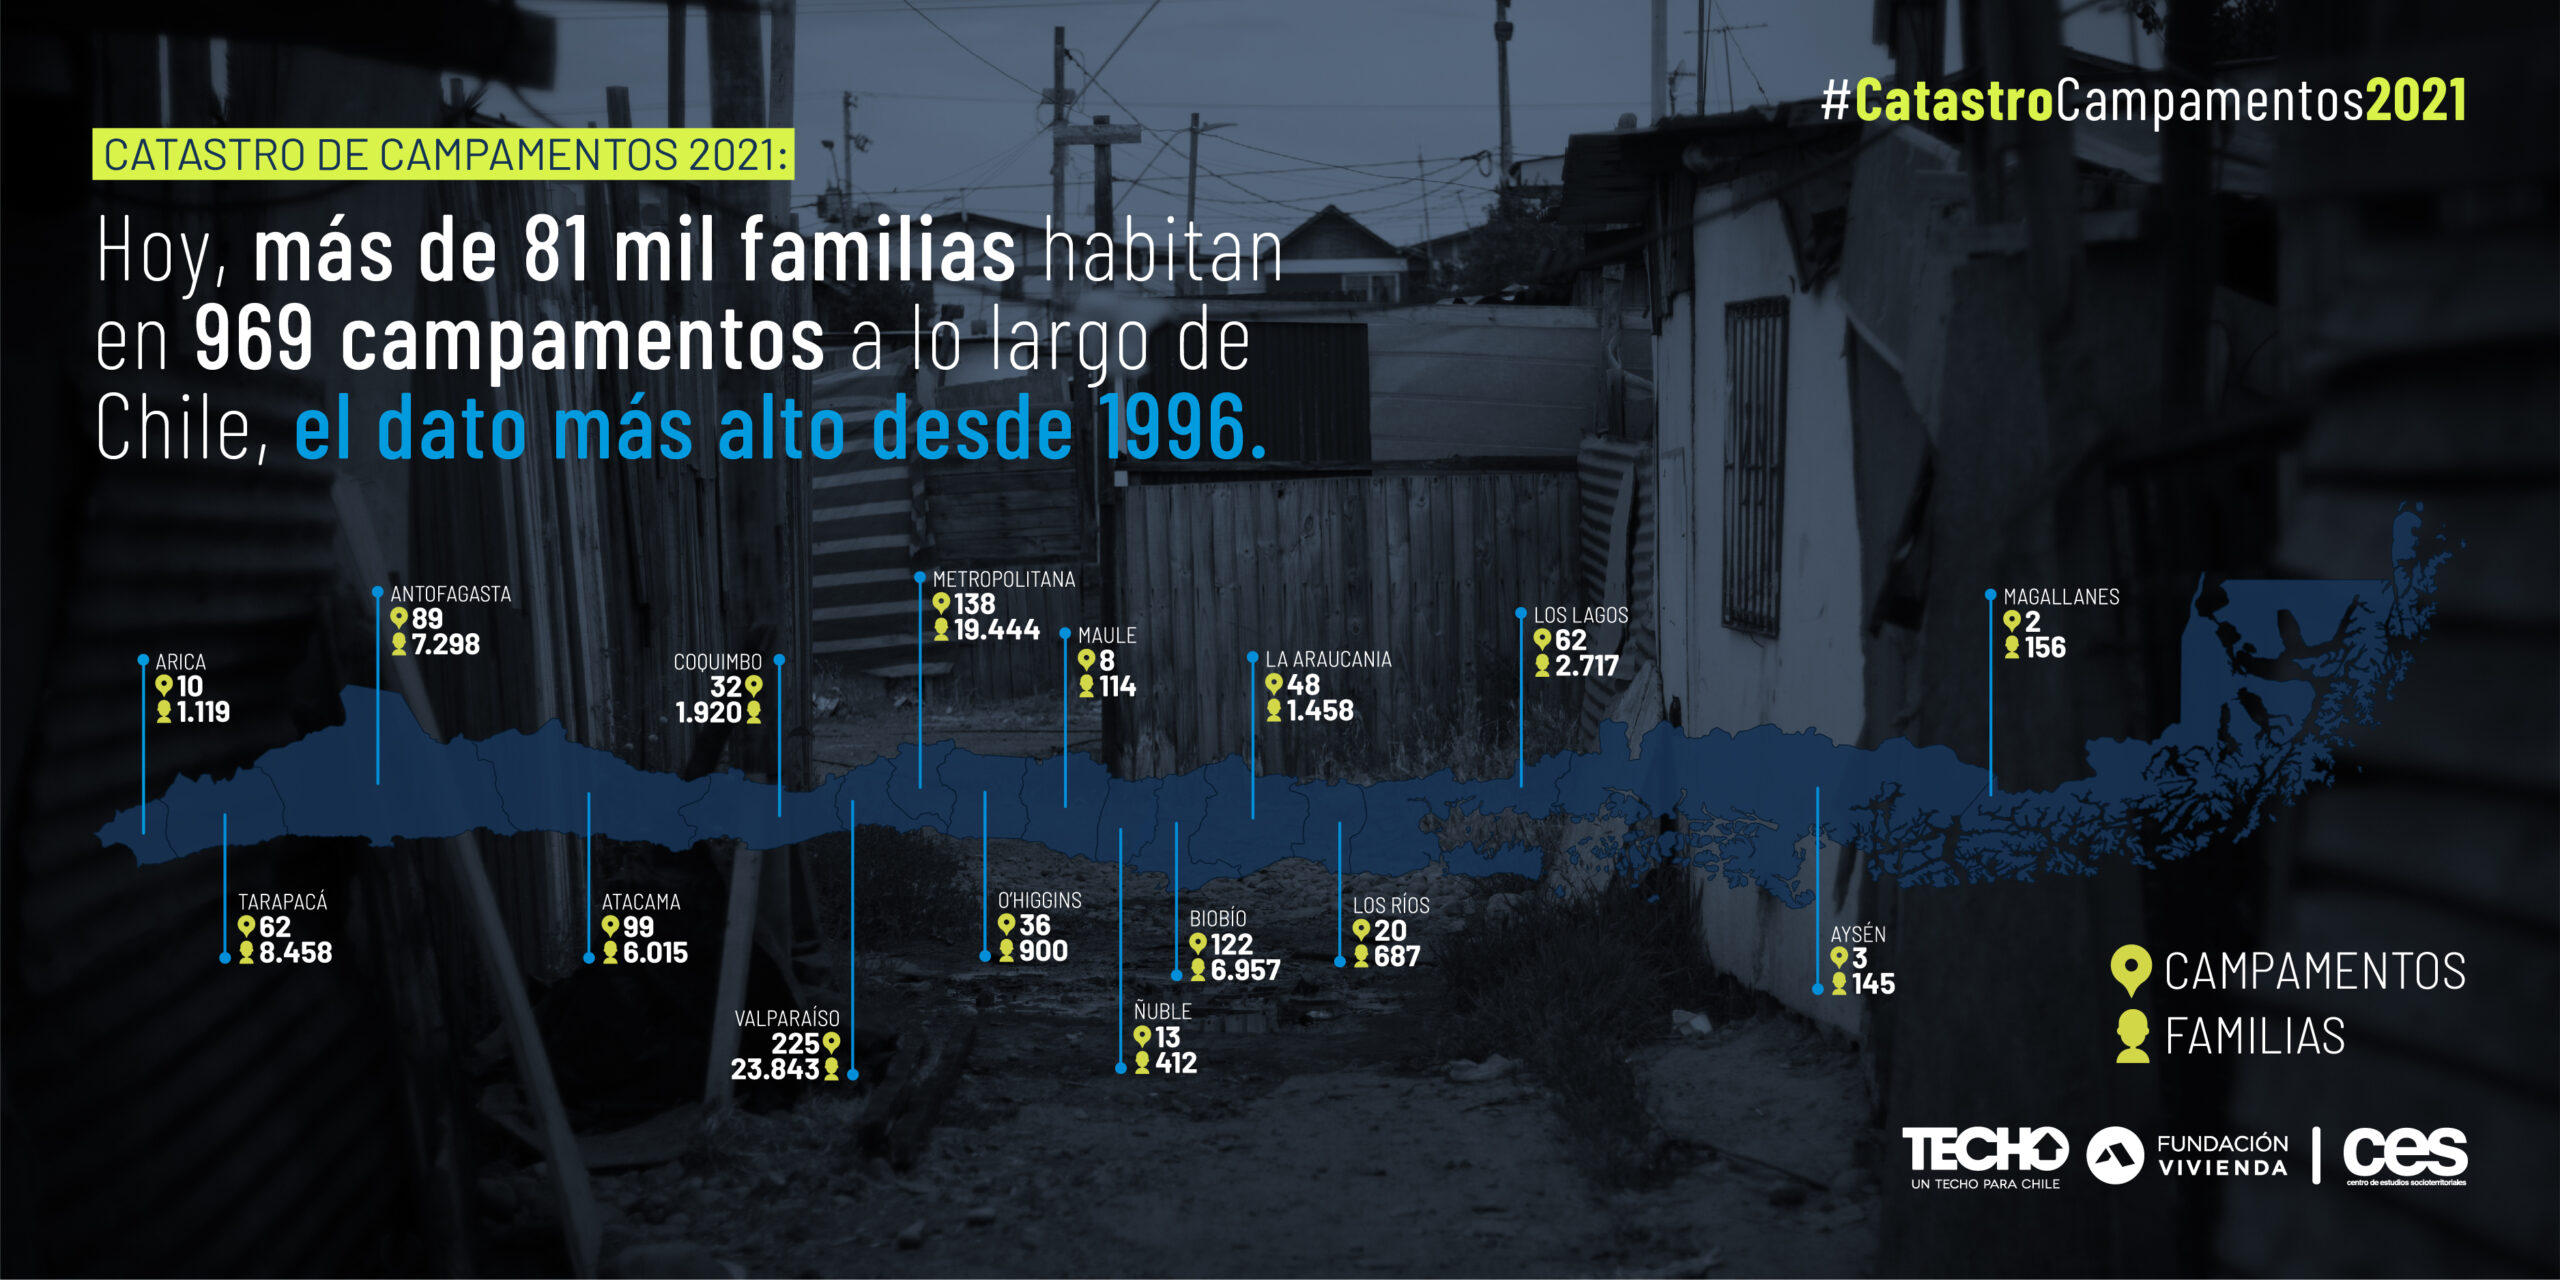 TECHO's figures for the number of slums and their population across the country.